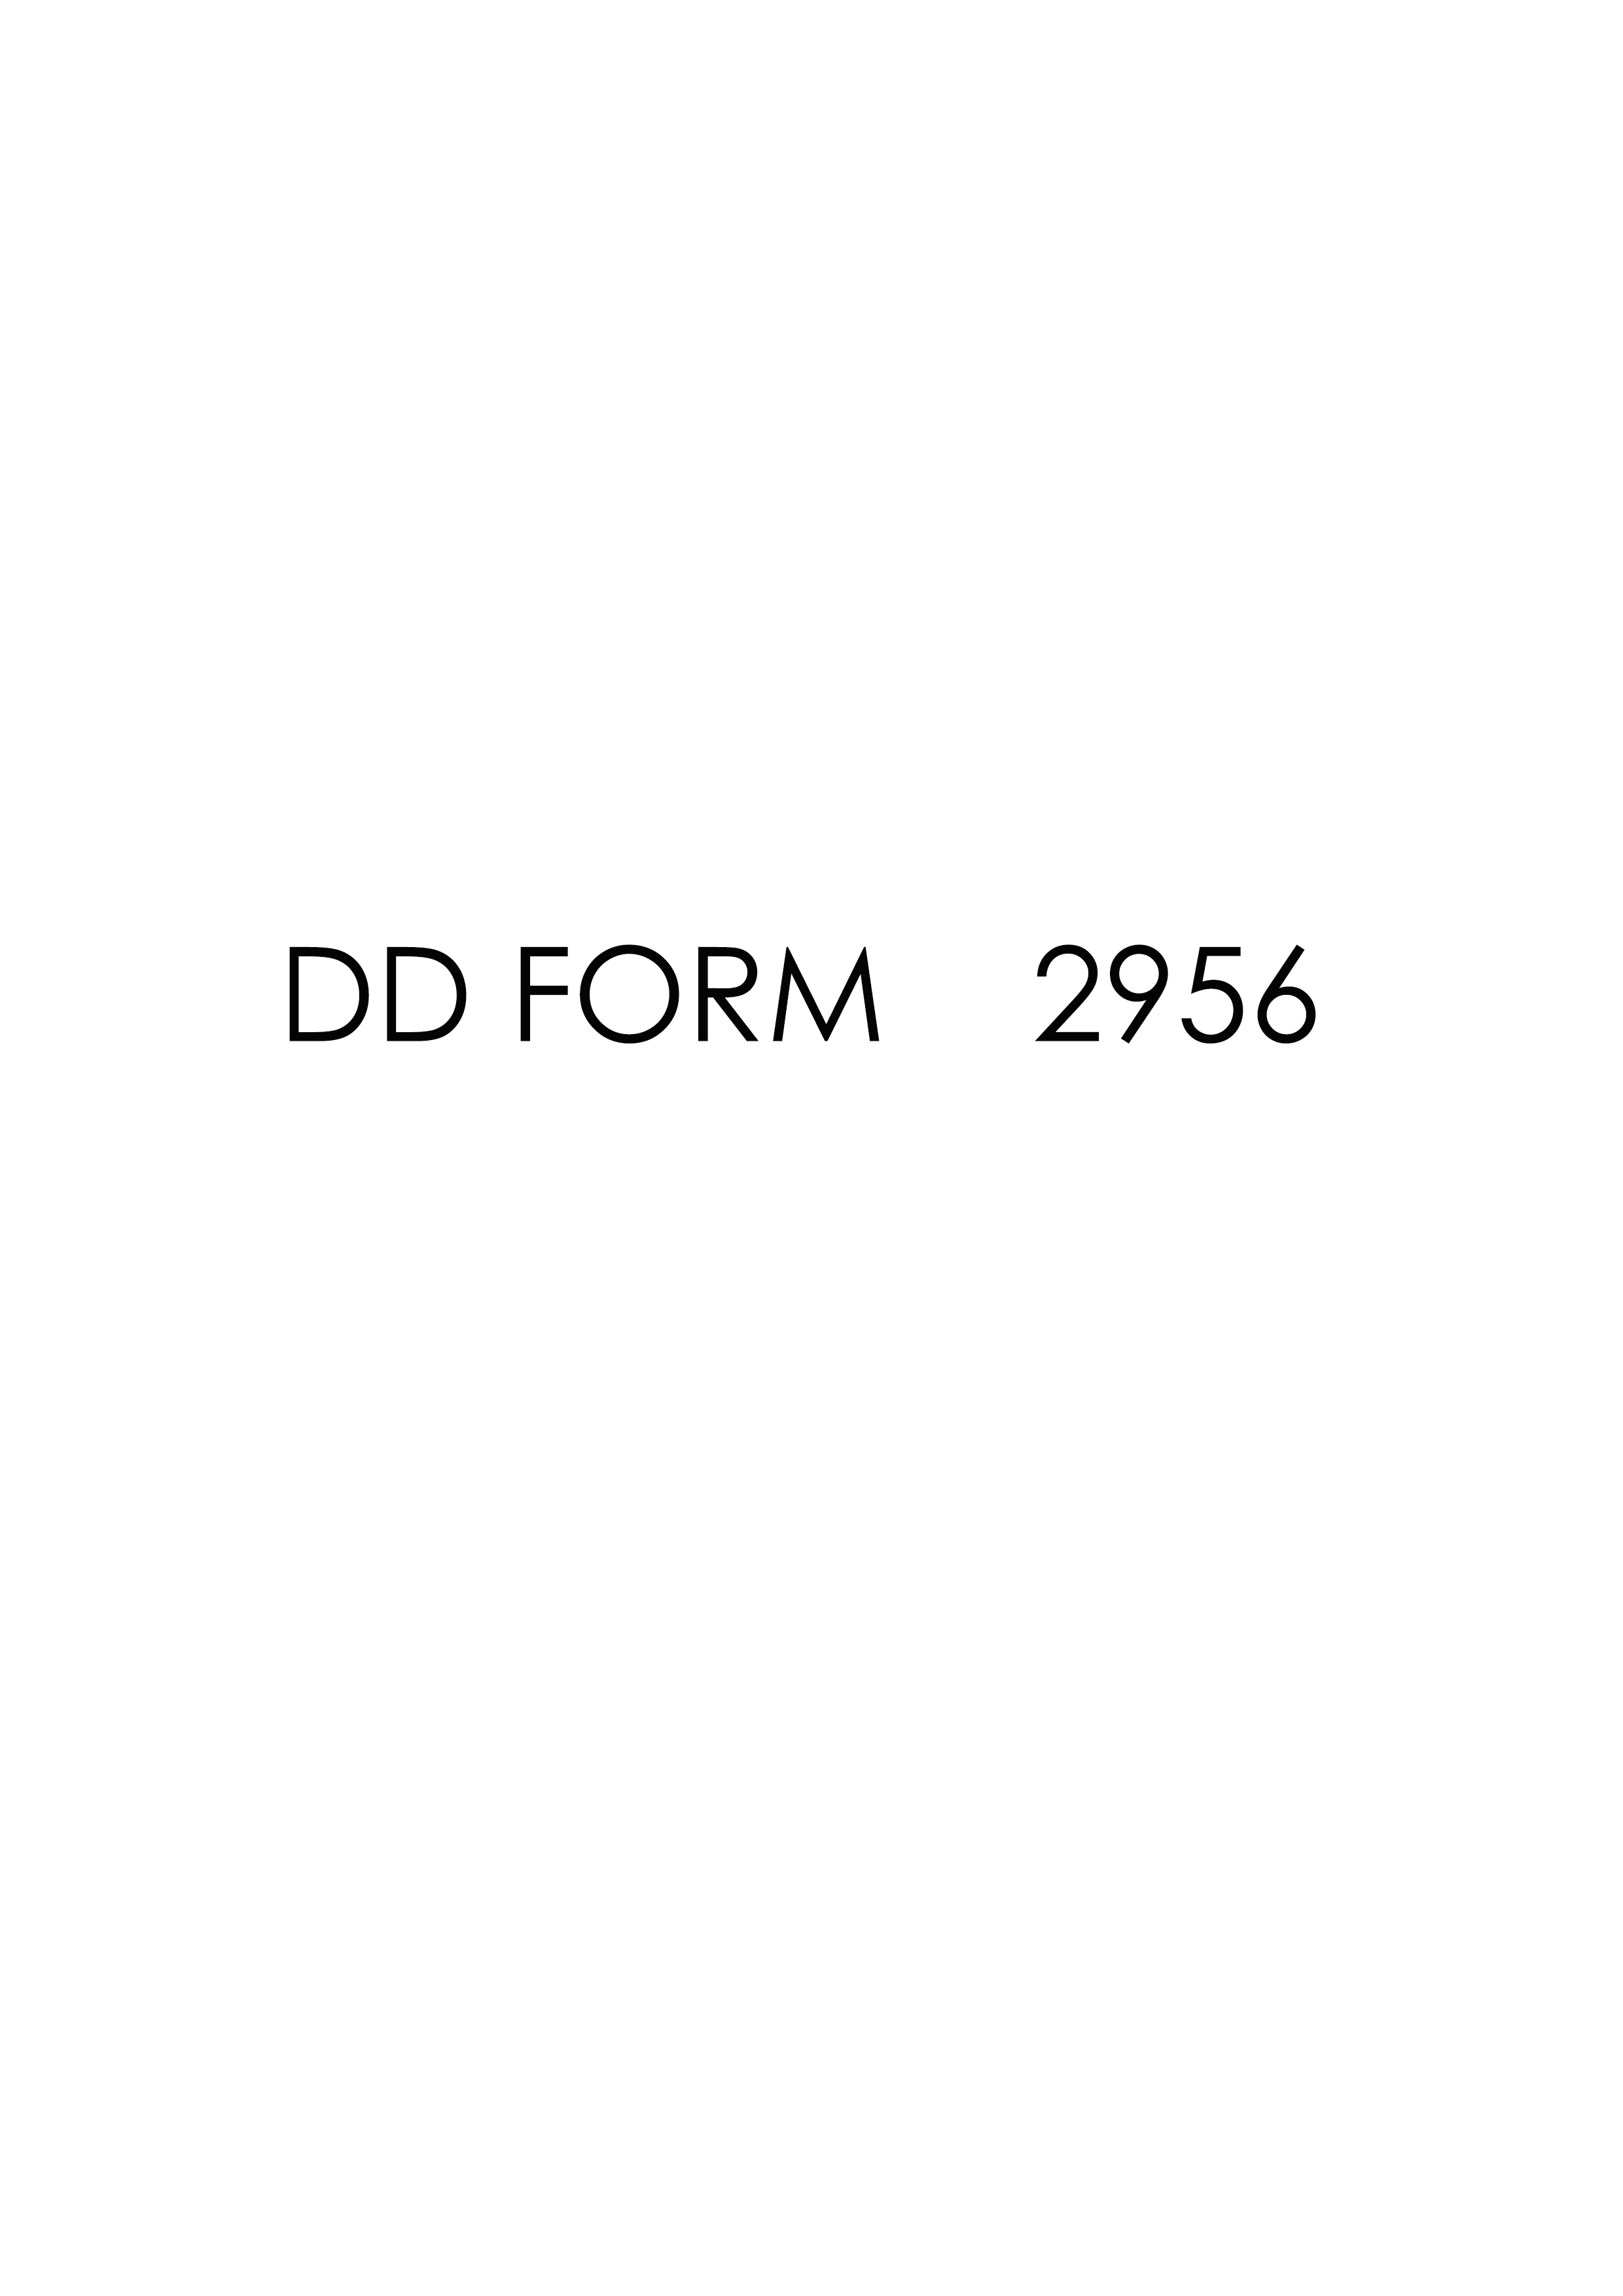 Download Fillable dd Form 2956